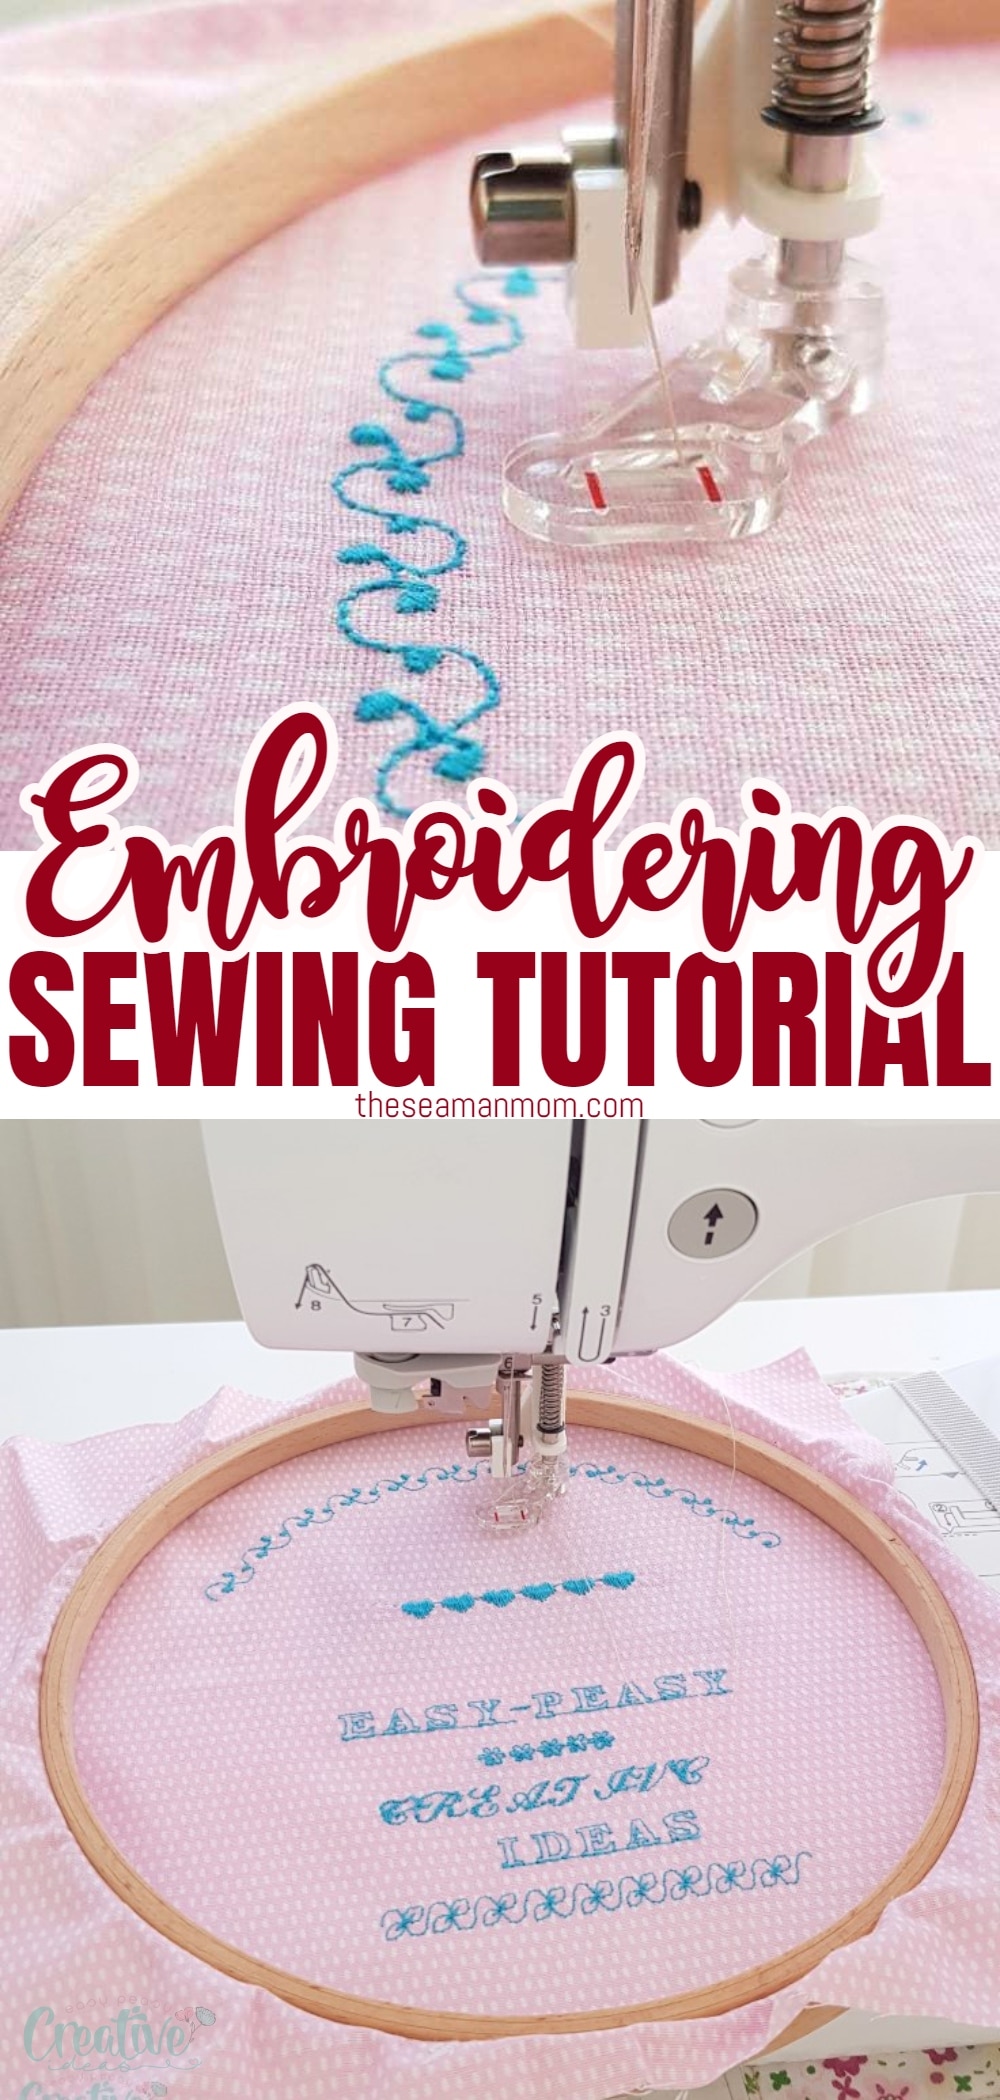 Embroidery is a beautiful way to add some personality and flair to your clothes, accessories, or home décor. It’s also a great way to show your loved ones that you care by stitching heartfelt messages onto their clothing. With the help of this guide, you’ll be able to learn everything there is to know about how to embroider with a sewing machine, in the comfort of your home! via @petroneagu